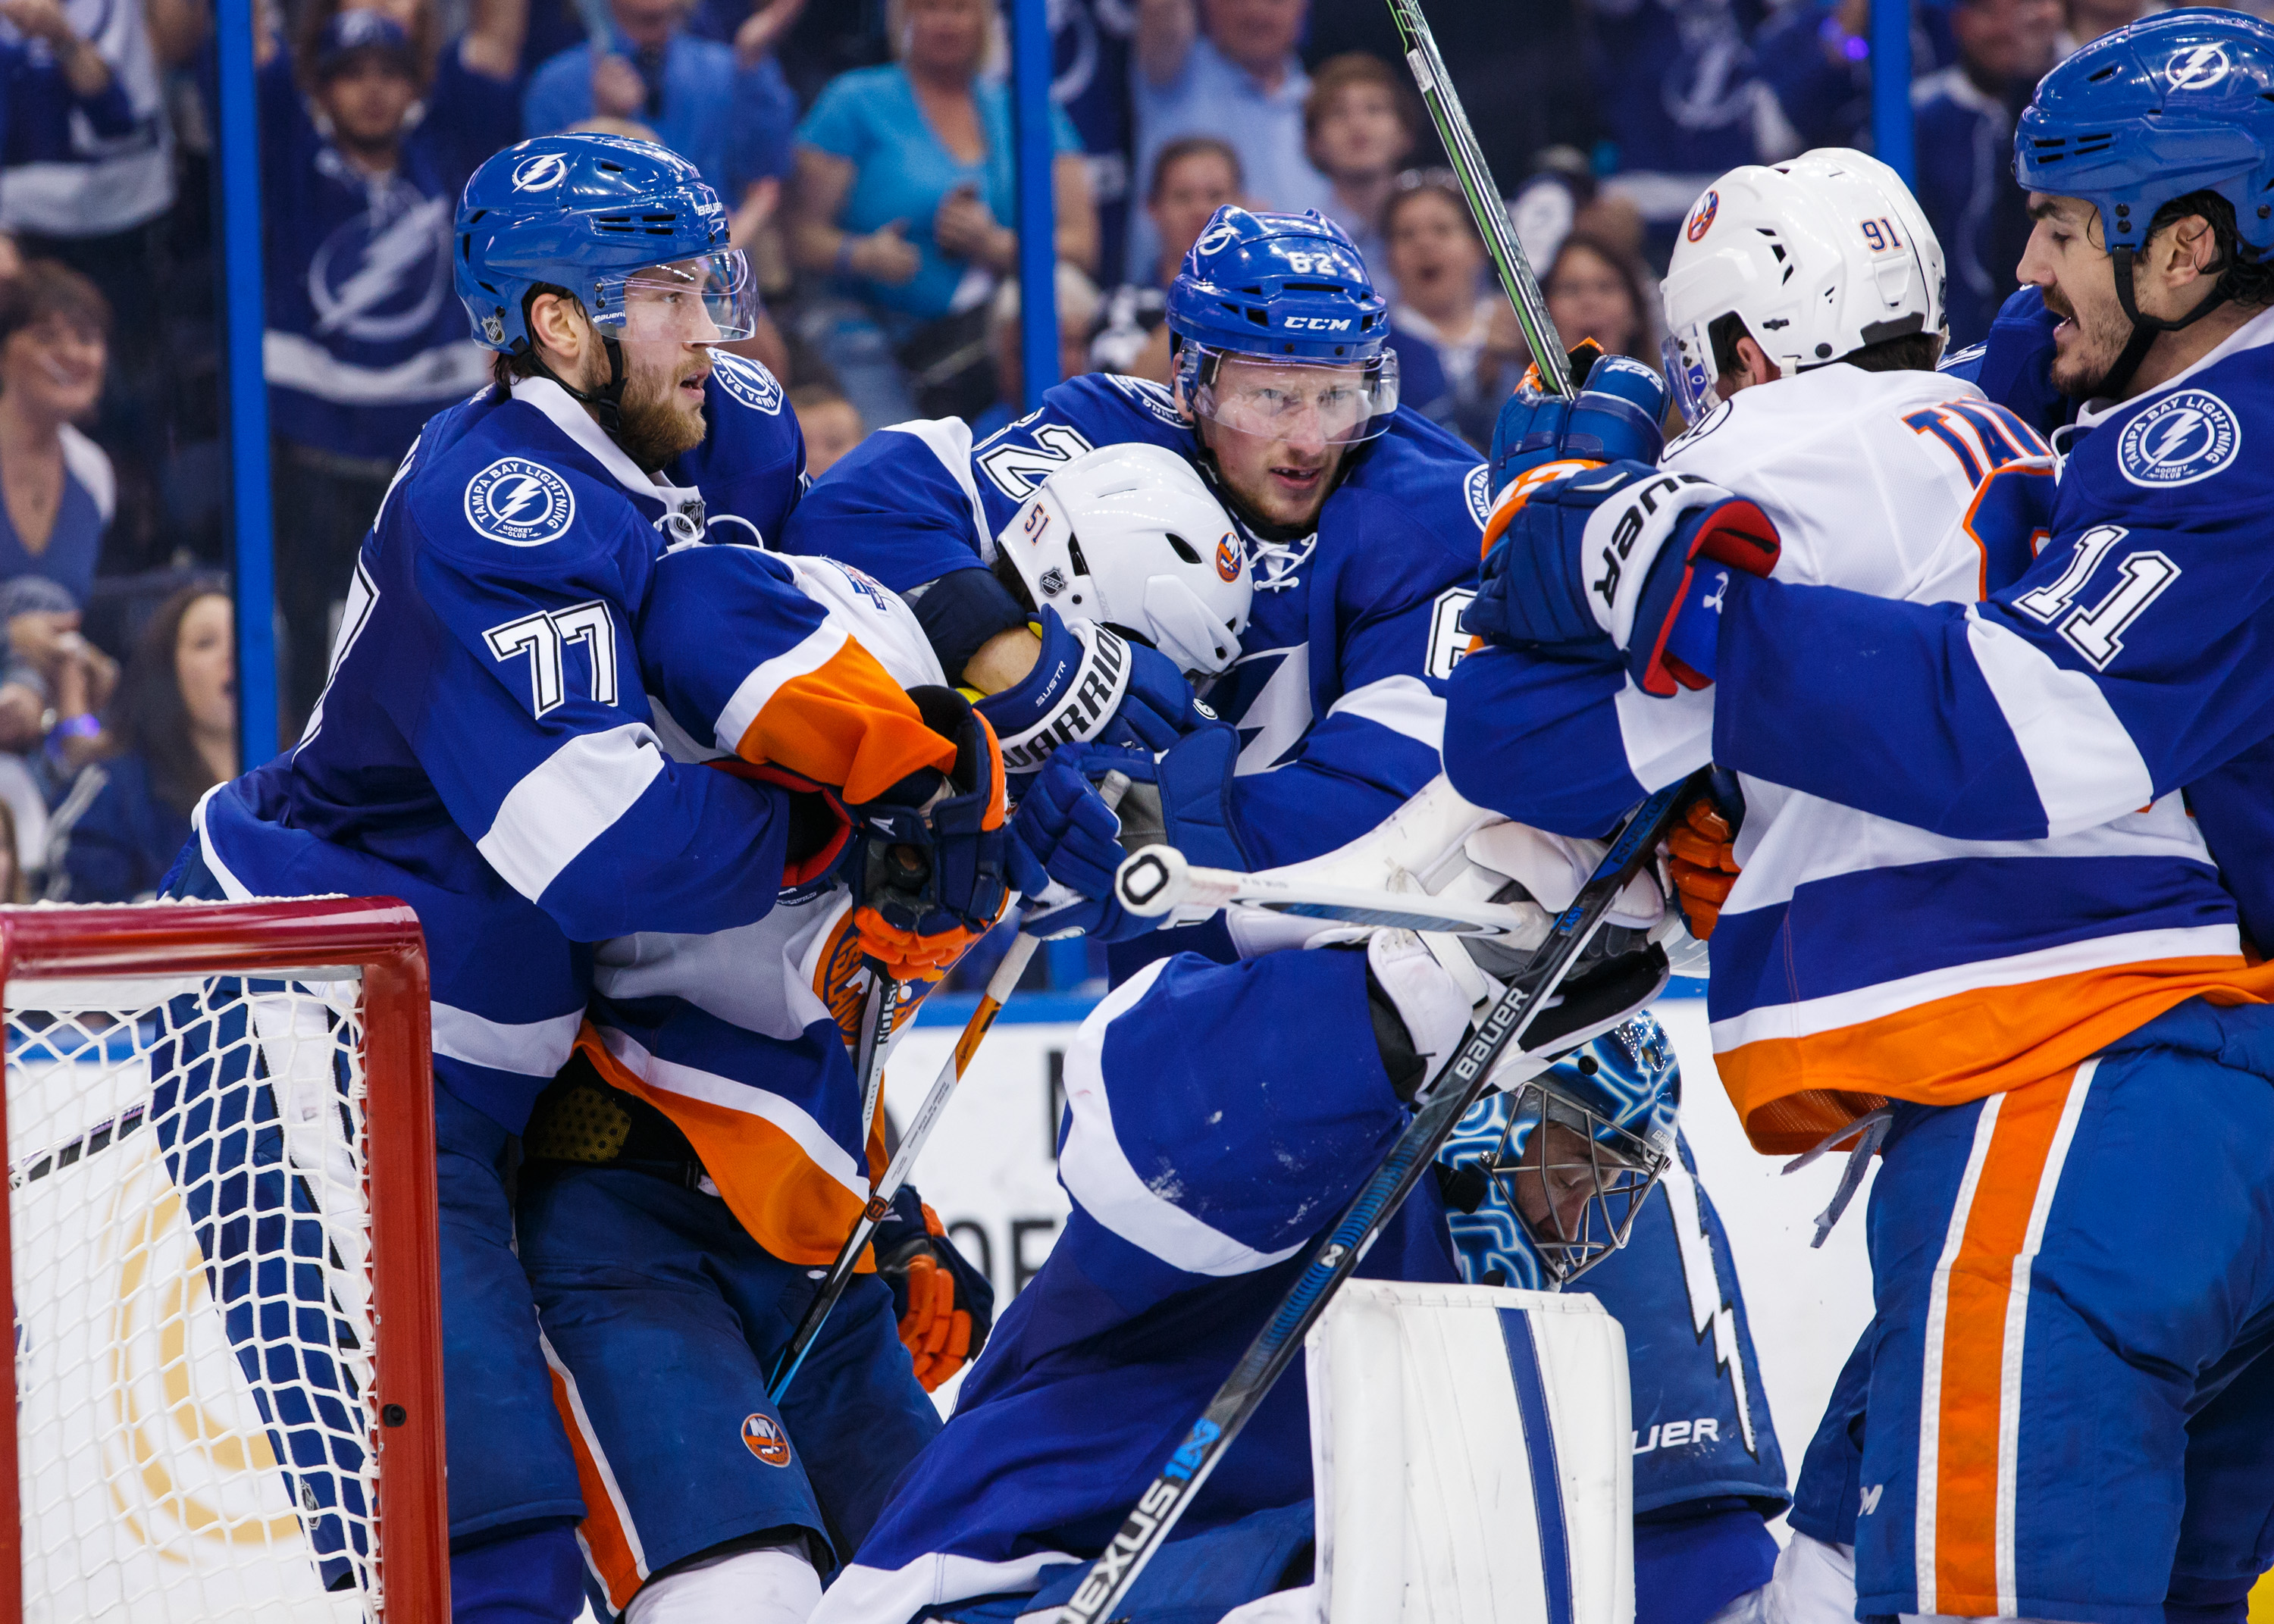 Blood on the ice: The New York Islanders and the Tampa Bay Lightning brawl during the 2016 NHL playoffs (Scott Audette; NHLI via Getty Images)